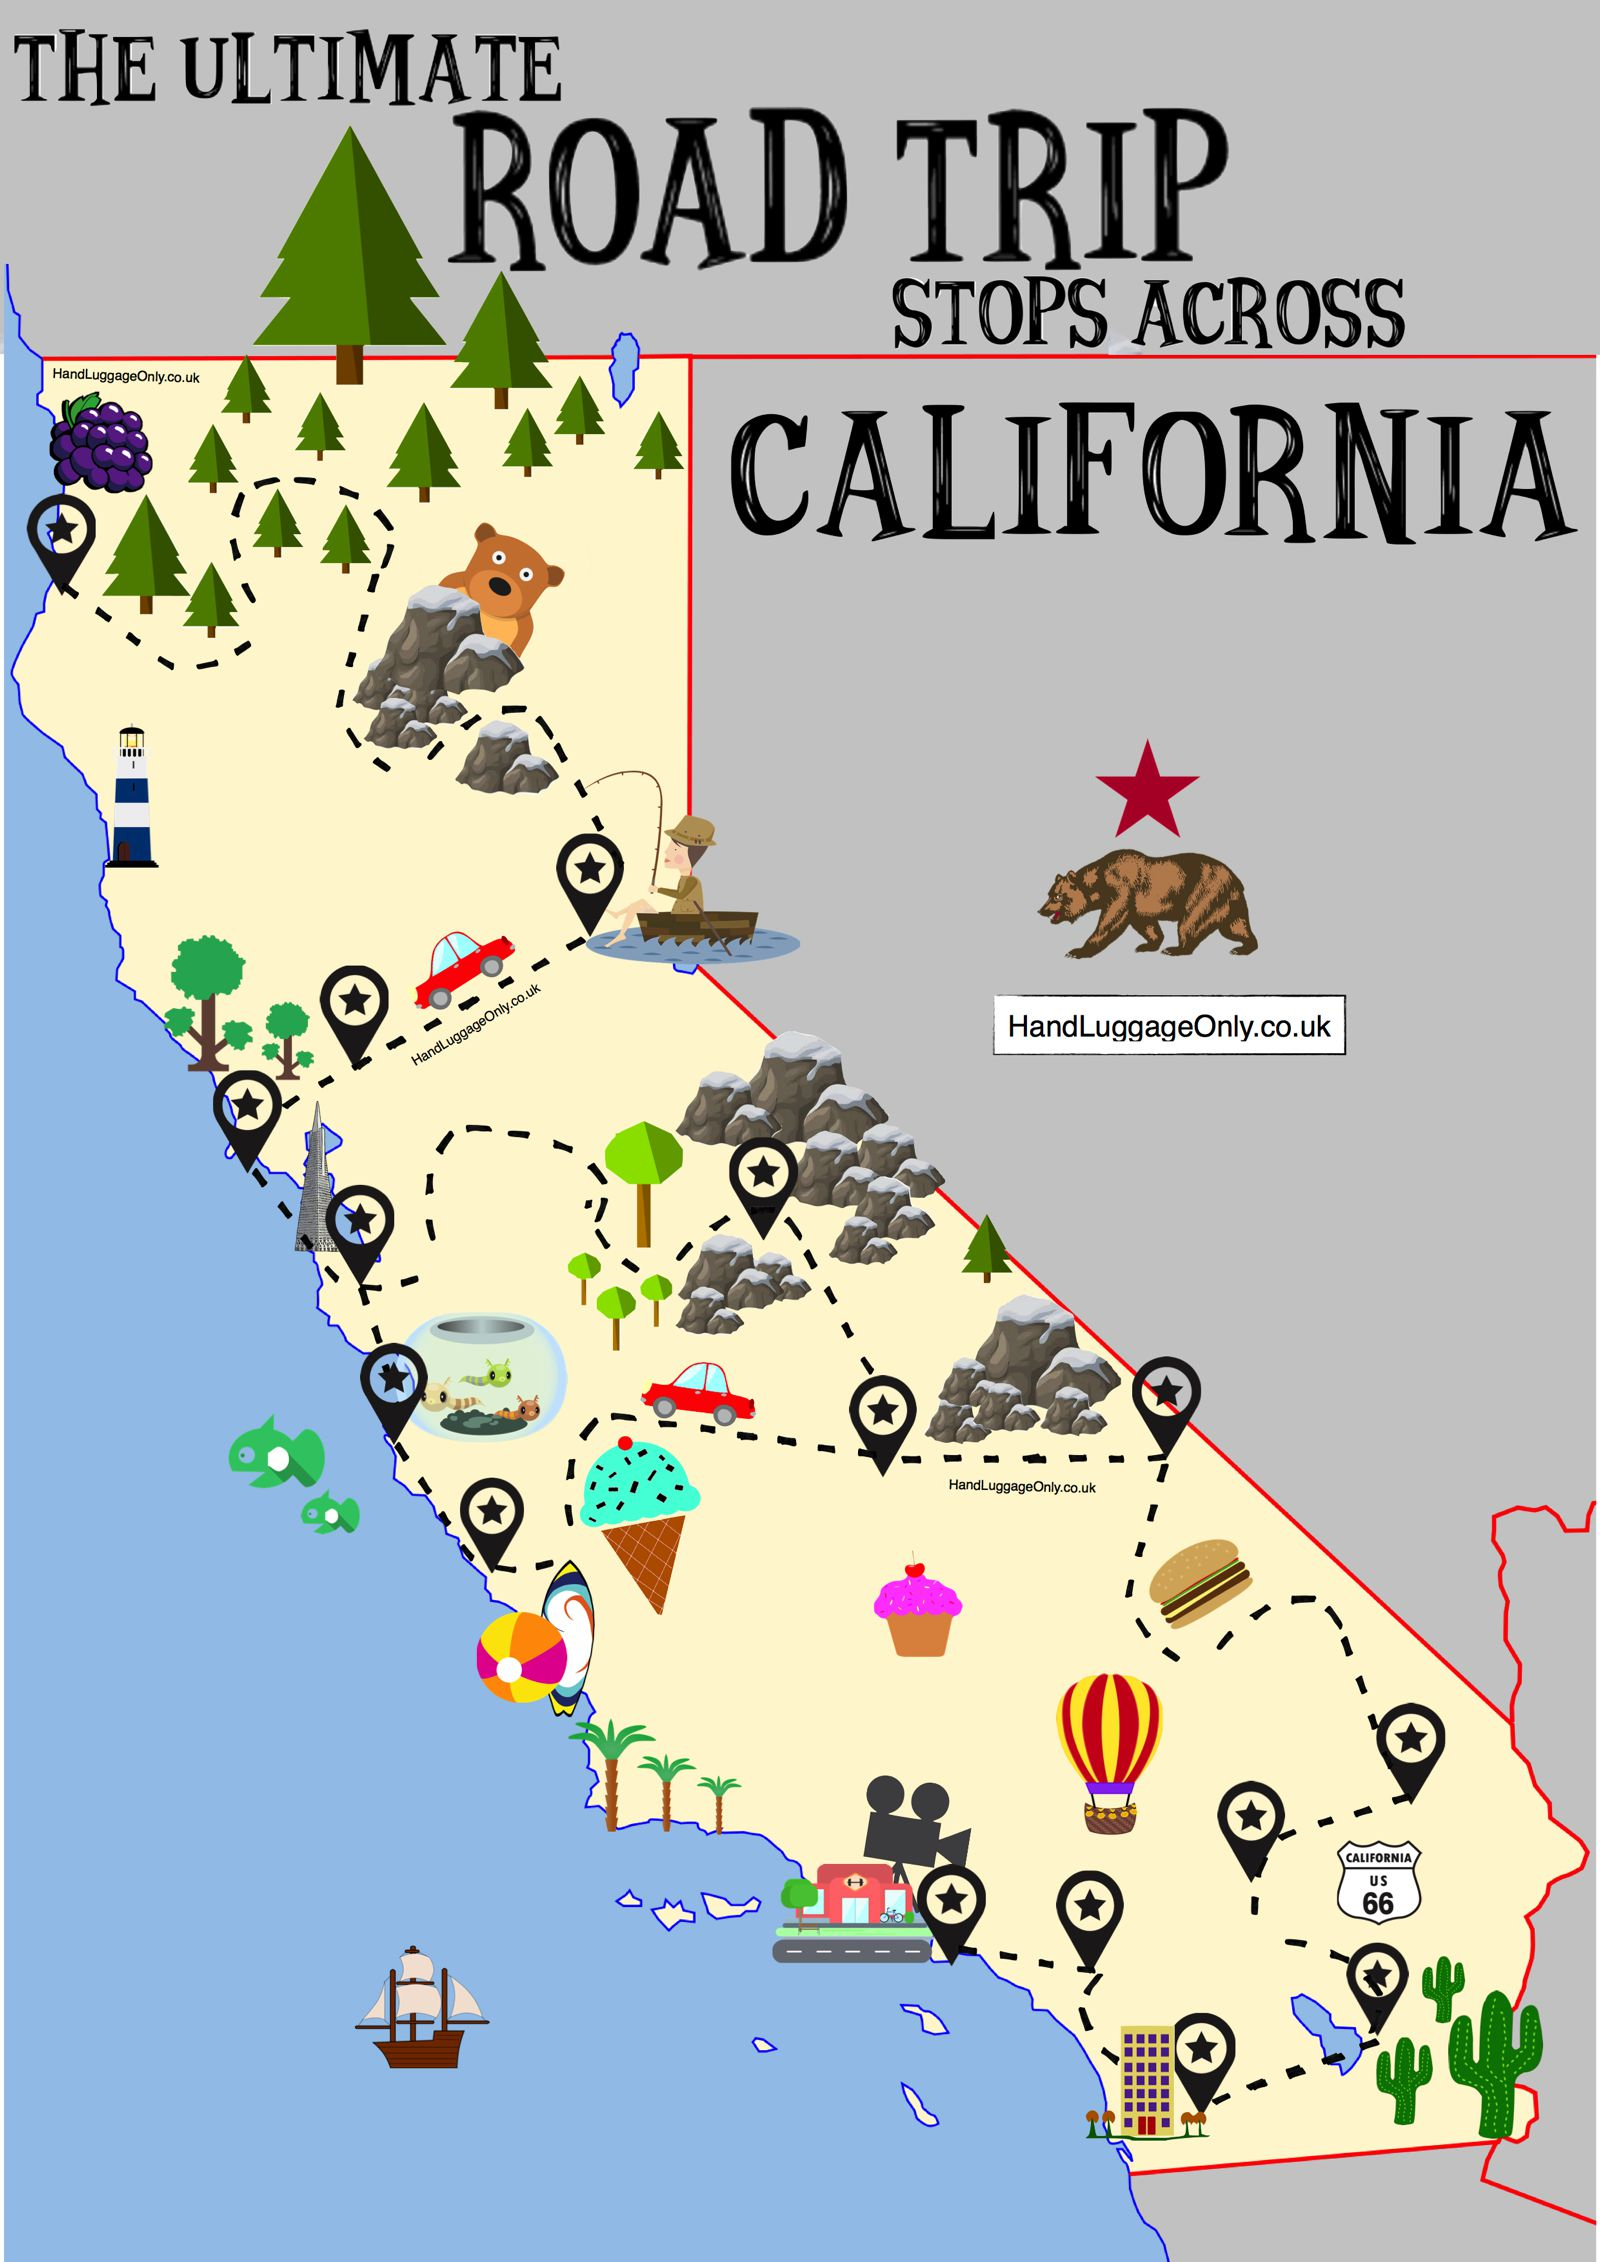 The Ultimate Road Trip Map Of Places To Visit In California - Hand - Driving Map Of California